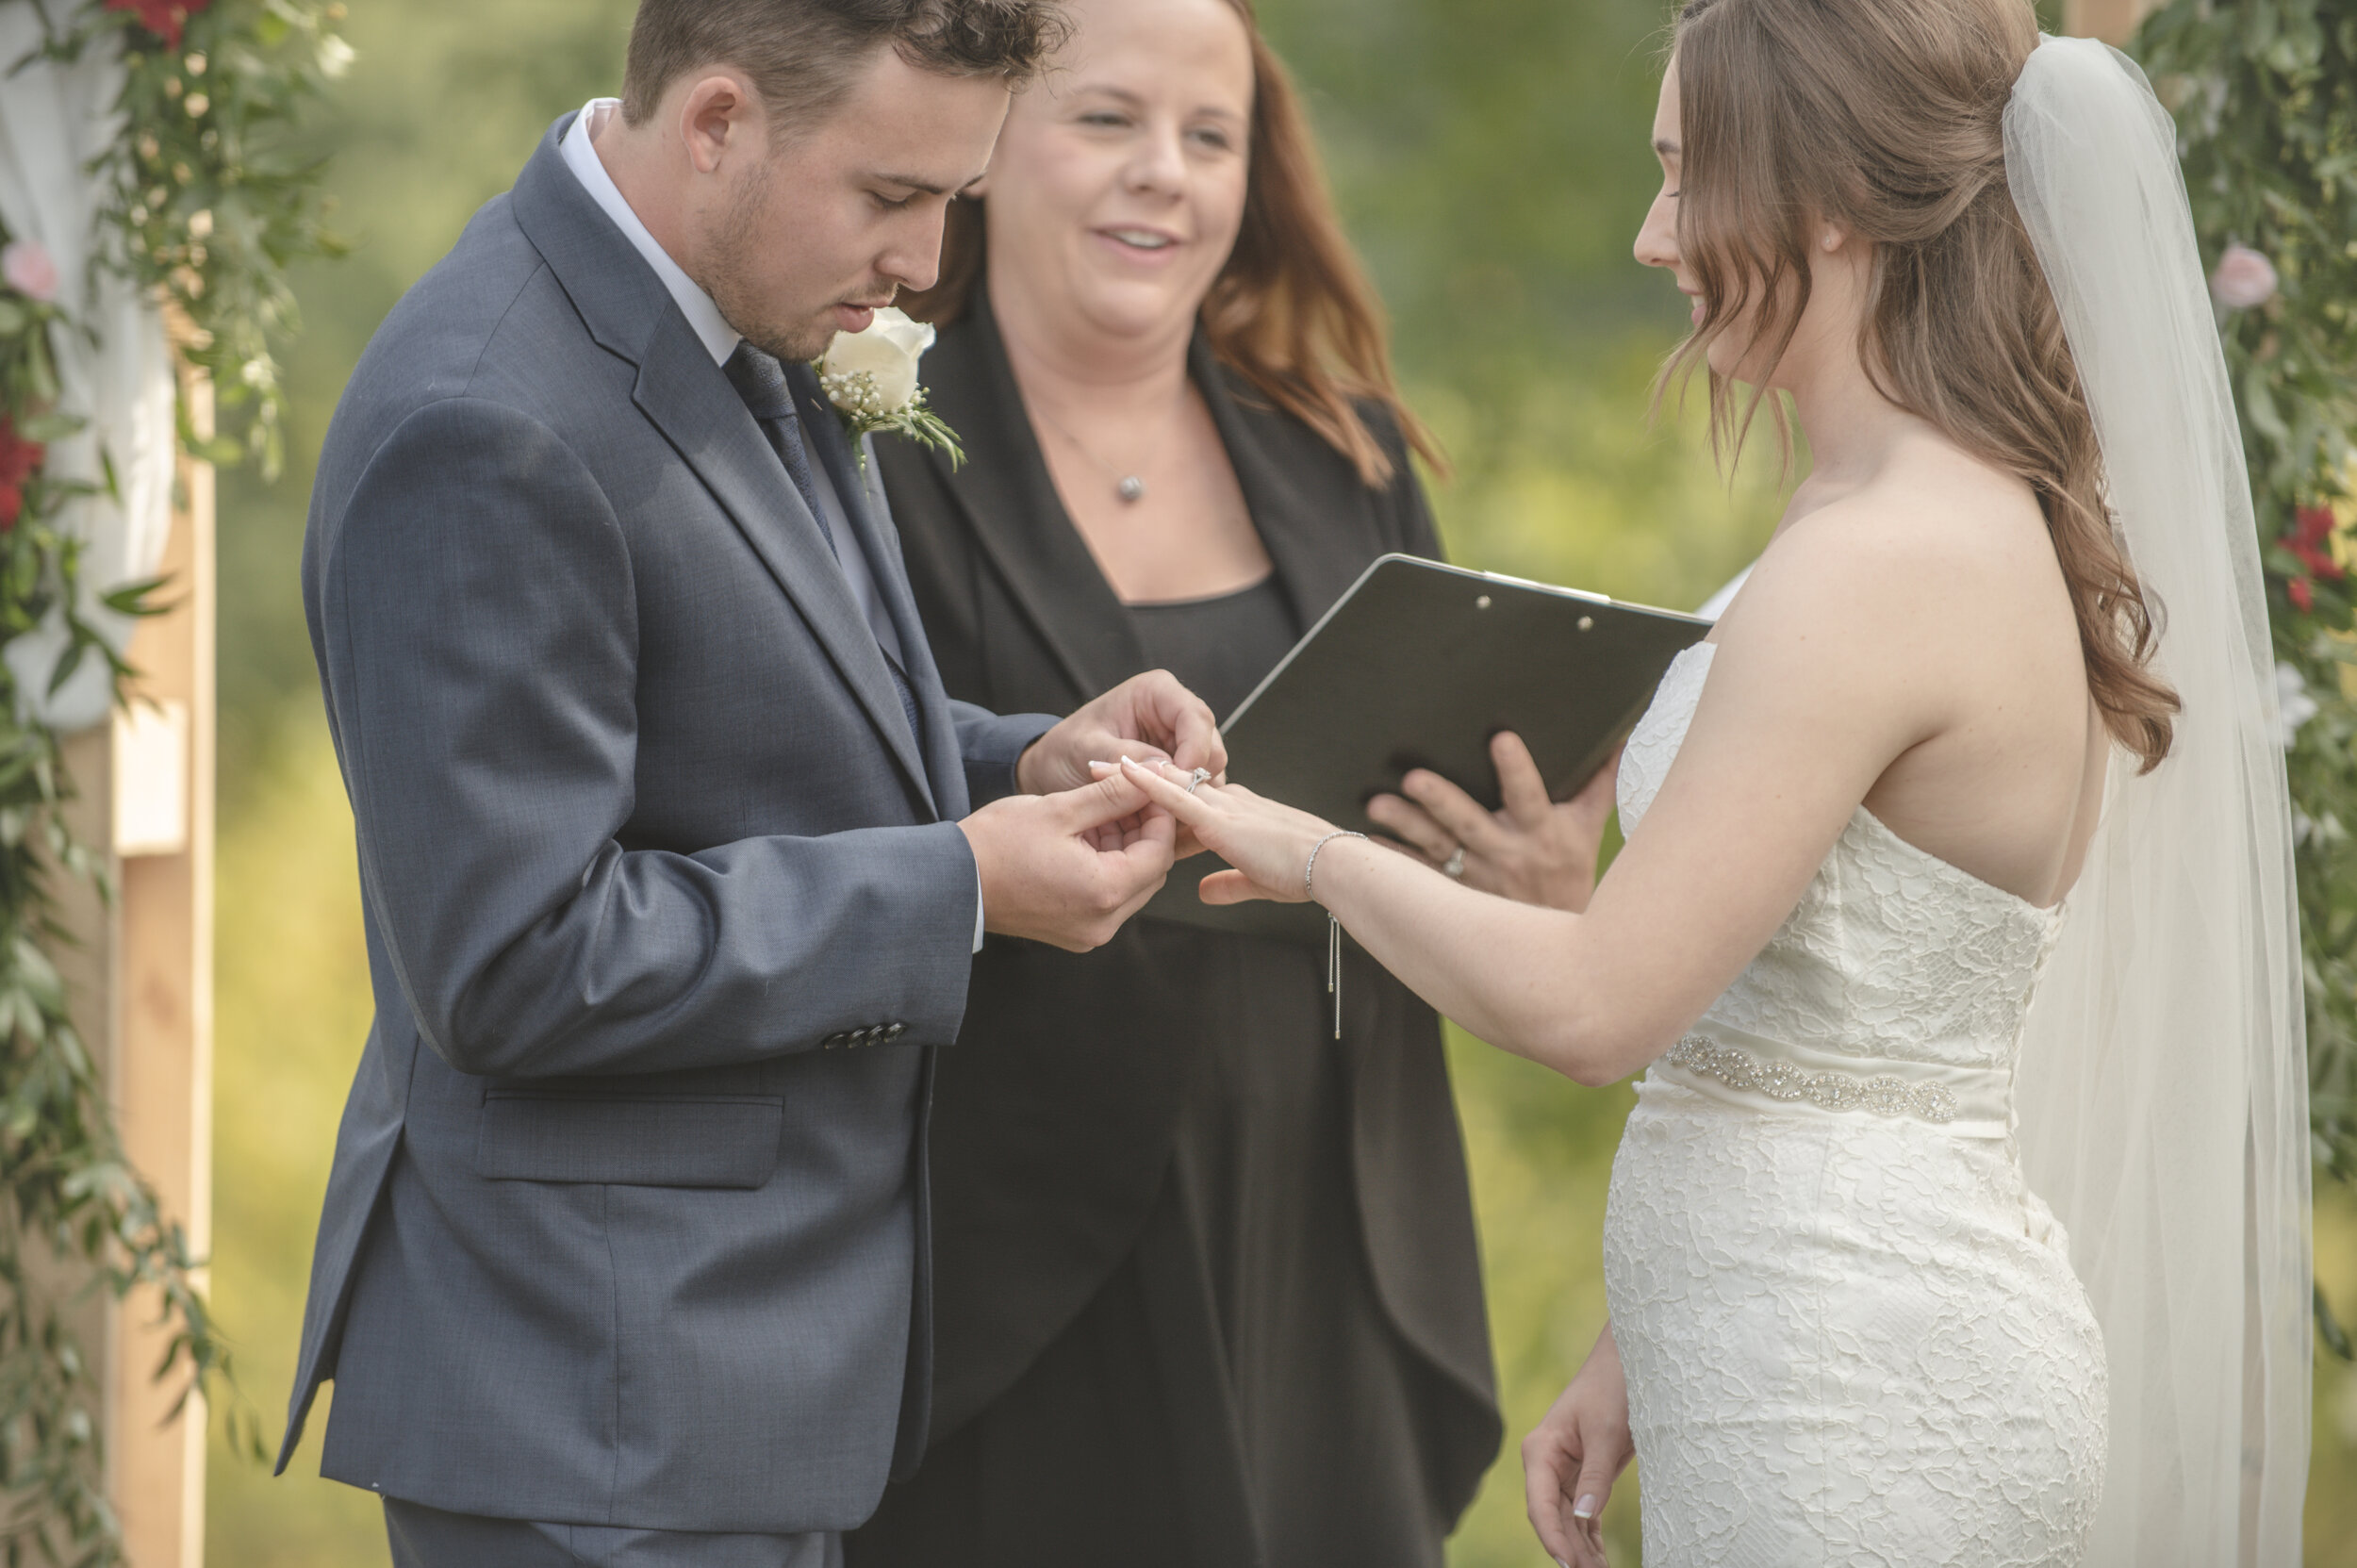 With this ring, I thee wed - Niagara Wedding - eTangPhotography.com